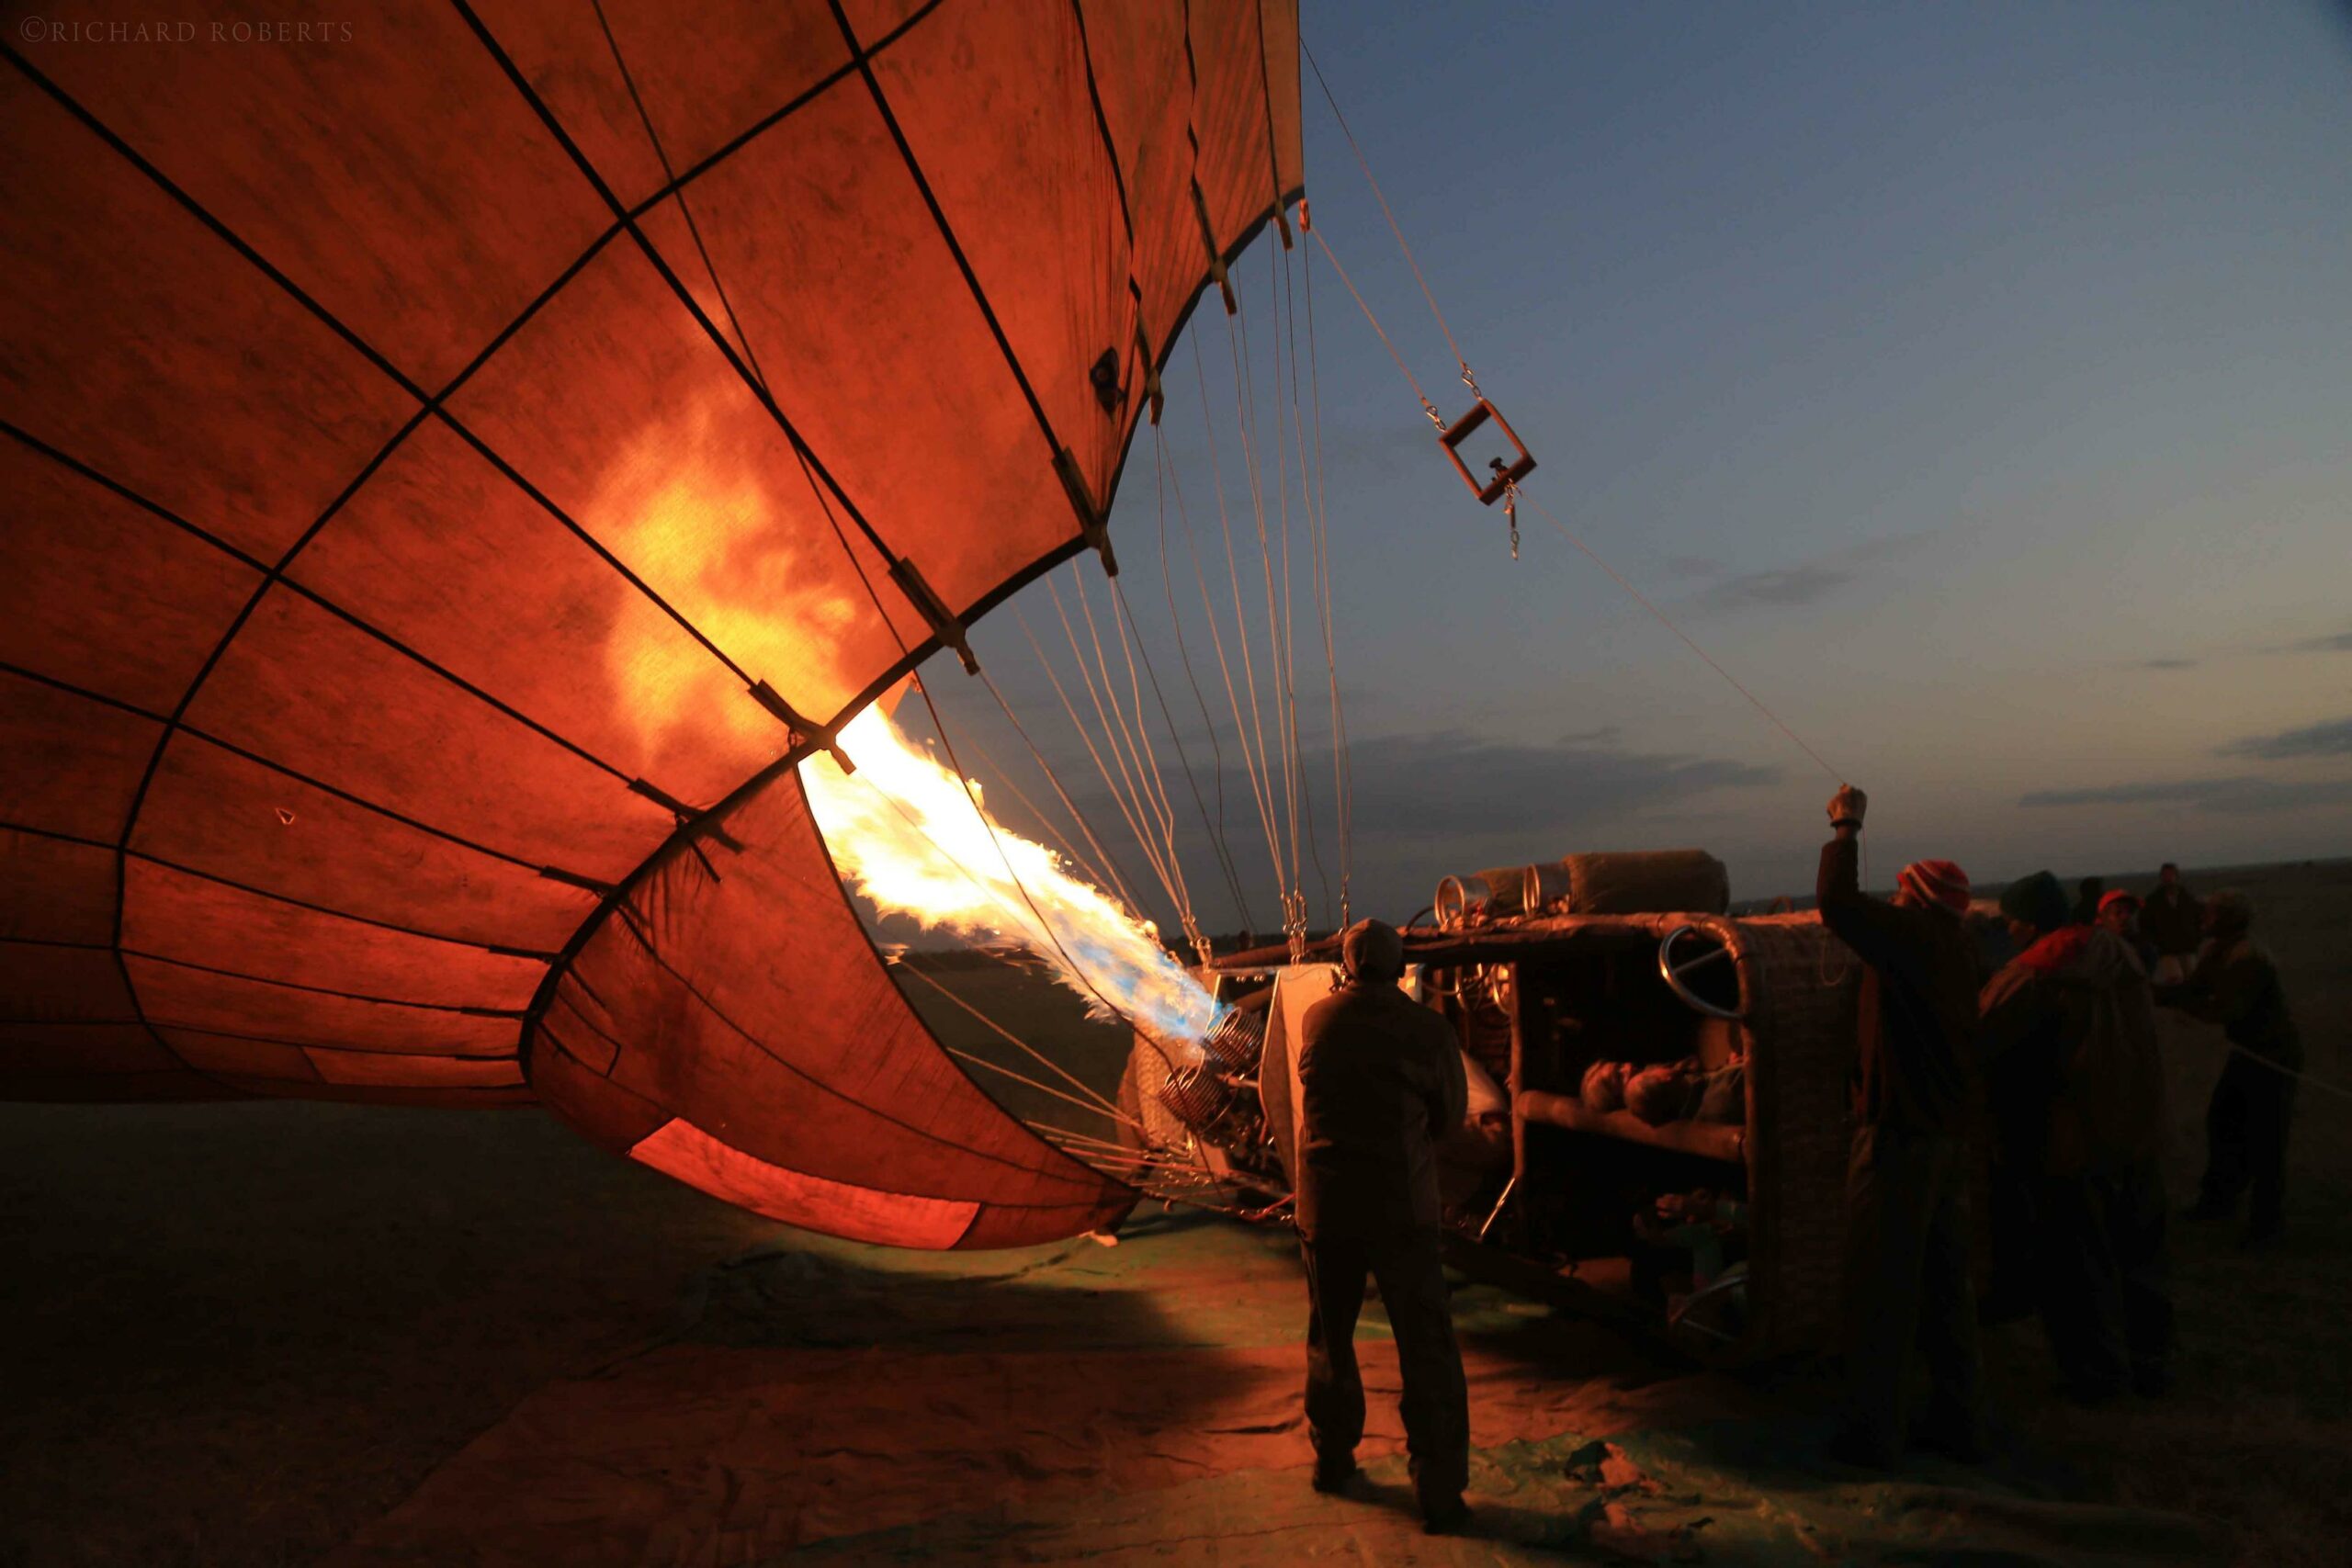 a group of people standing around a hot air balloon.